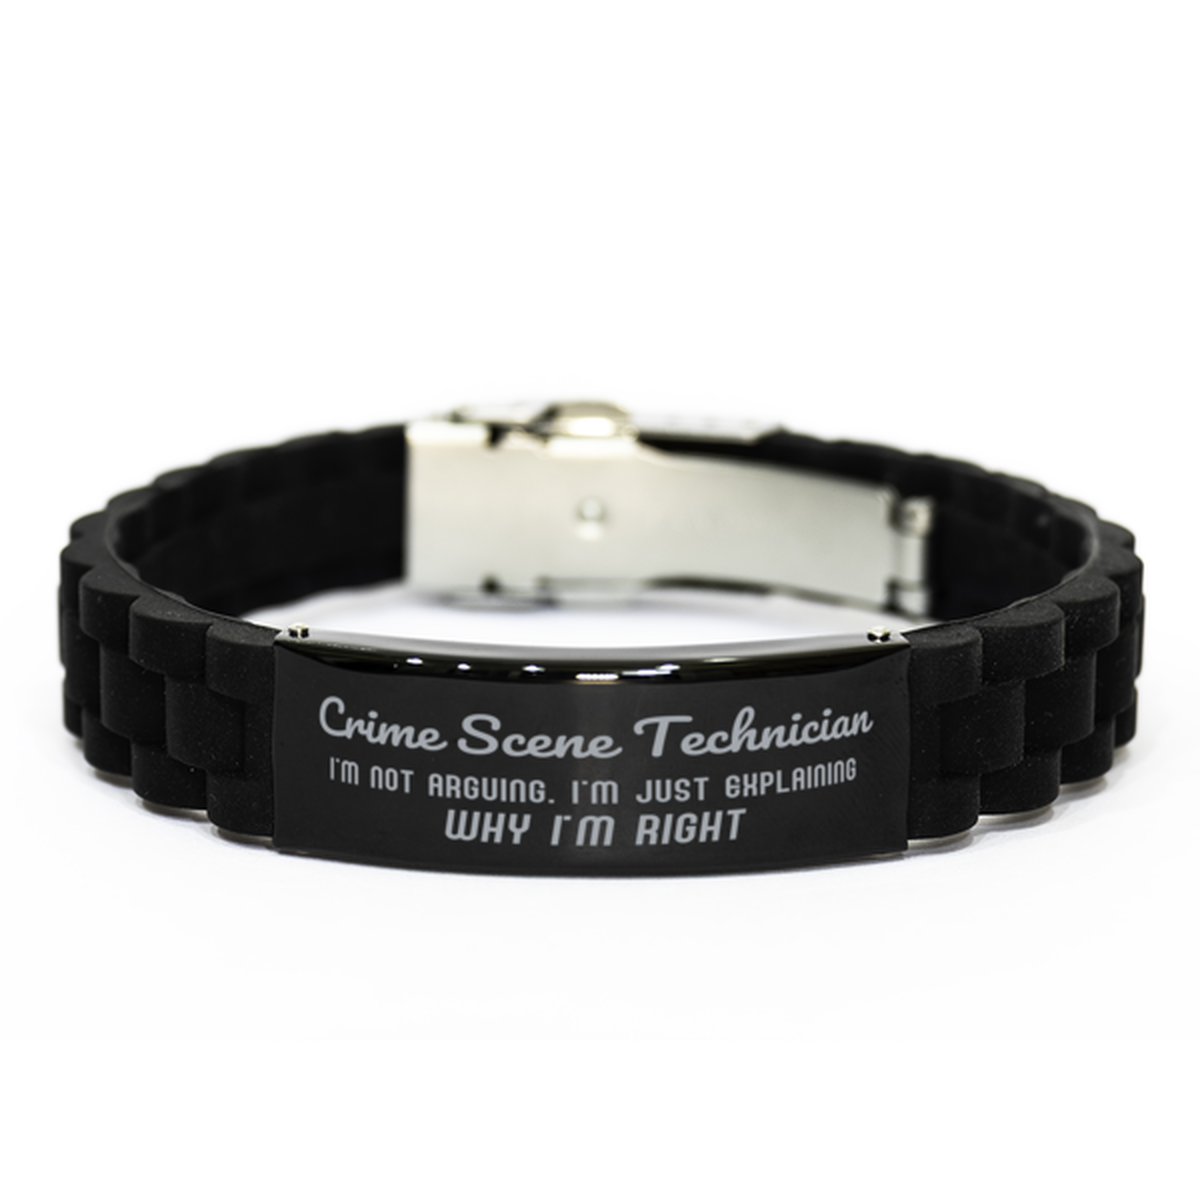 Crime Scene Technician I'm not Arguing. I'm Just Explaining Why I'm RIGHT Black Glidelock Clasp Bracelet, Funny Saying Quote Crime Scene Technician Gifts For Crime Scene Technician Graduation Birthday Christmas Gifts for Men Women Coworker